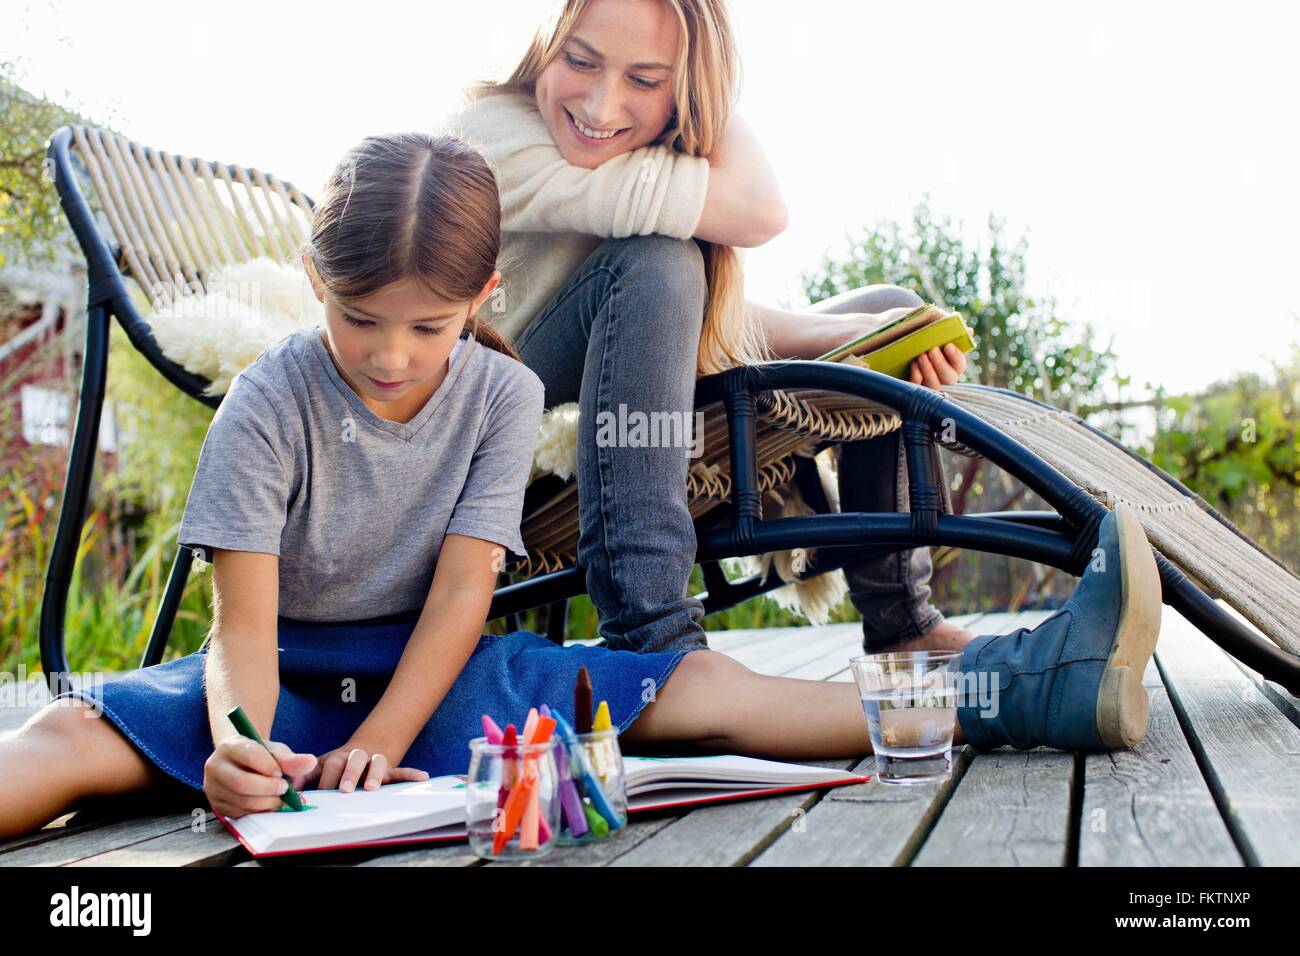 Girl drawing on decking with mother sitting close by, smiling Stock Photo